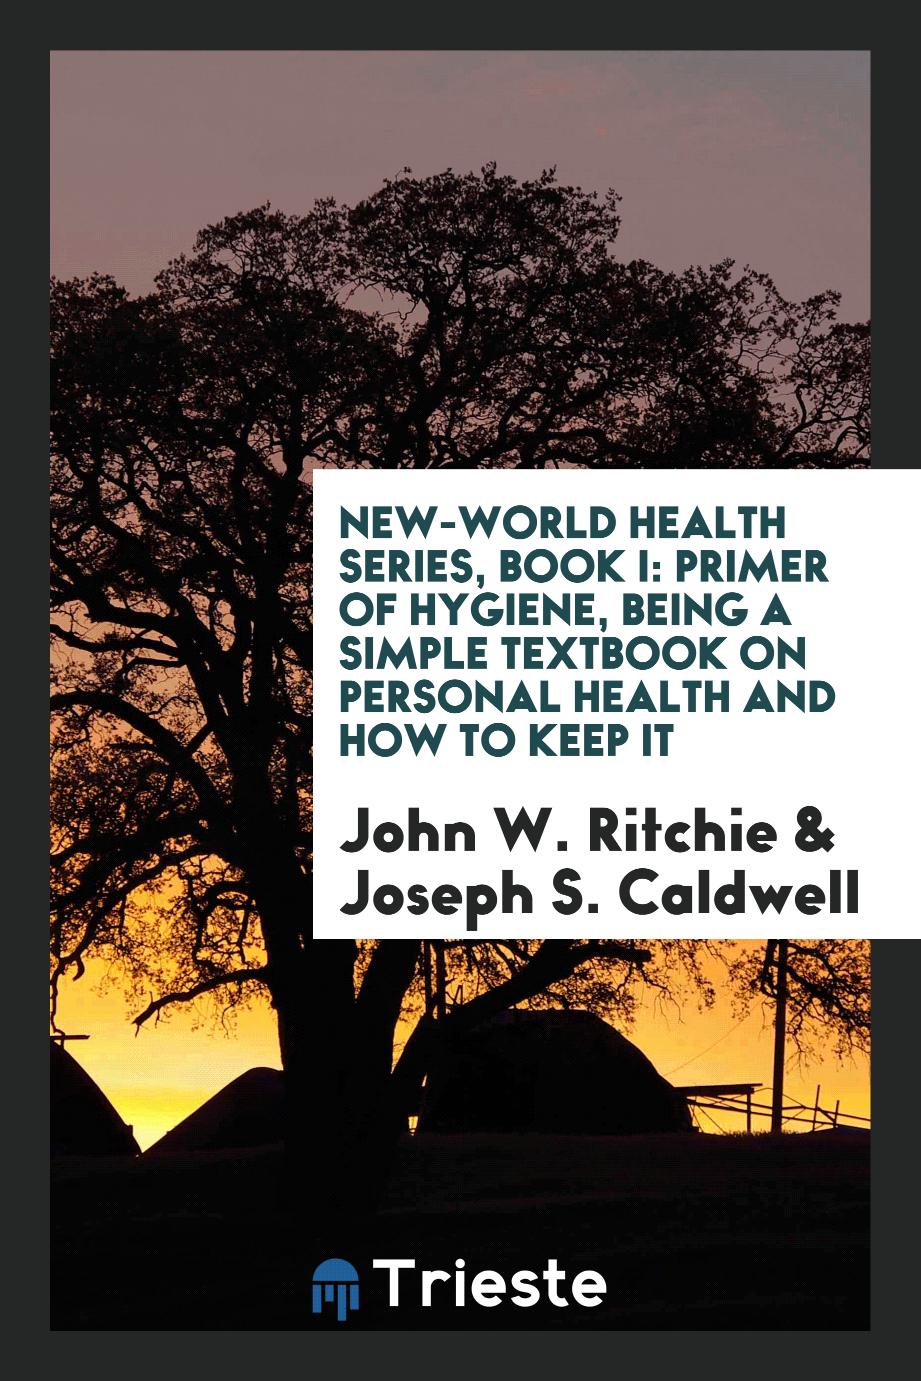 New-World Health Series, Book I: Primer of Hygiene, Being a Simple Textbook on Personal Health and How to Keep It